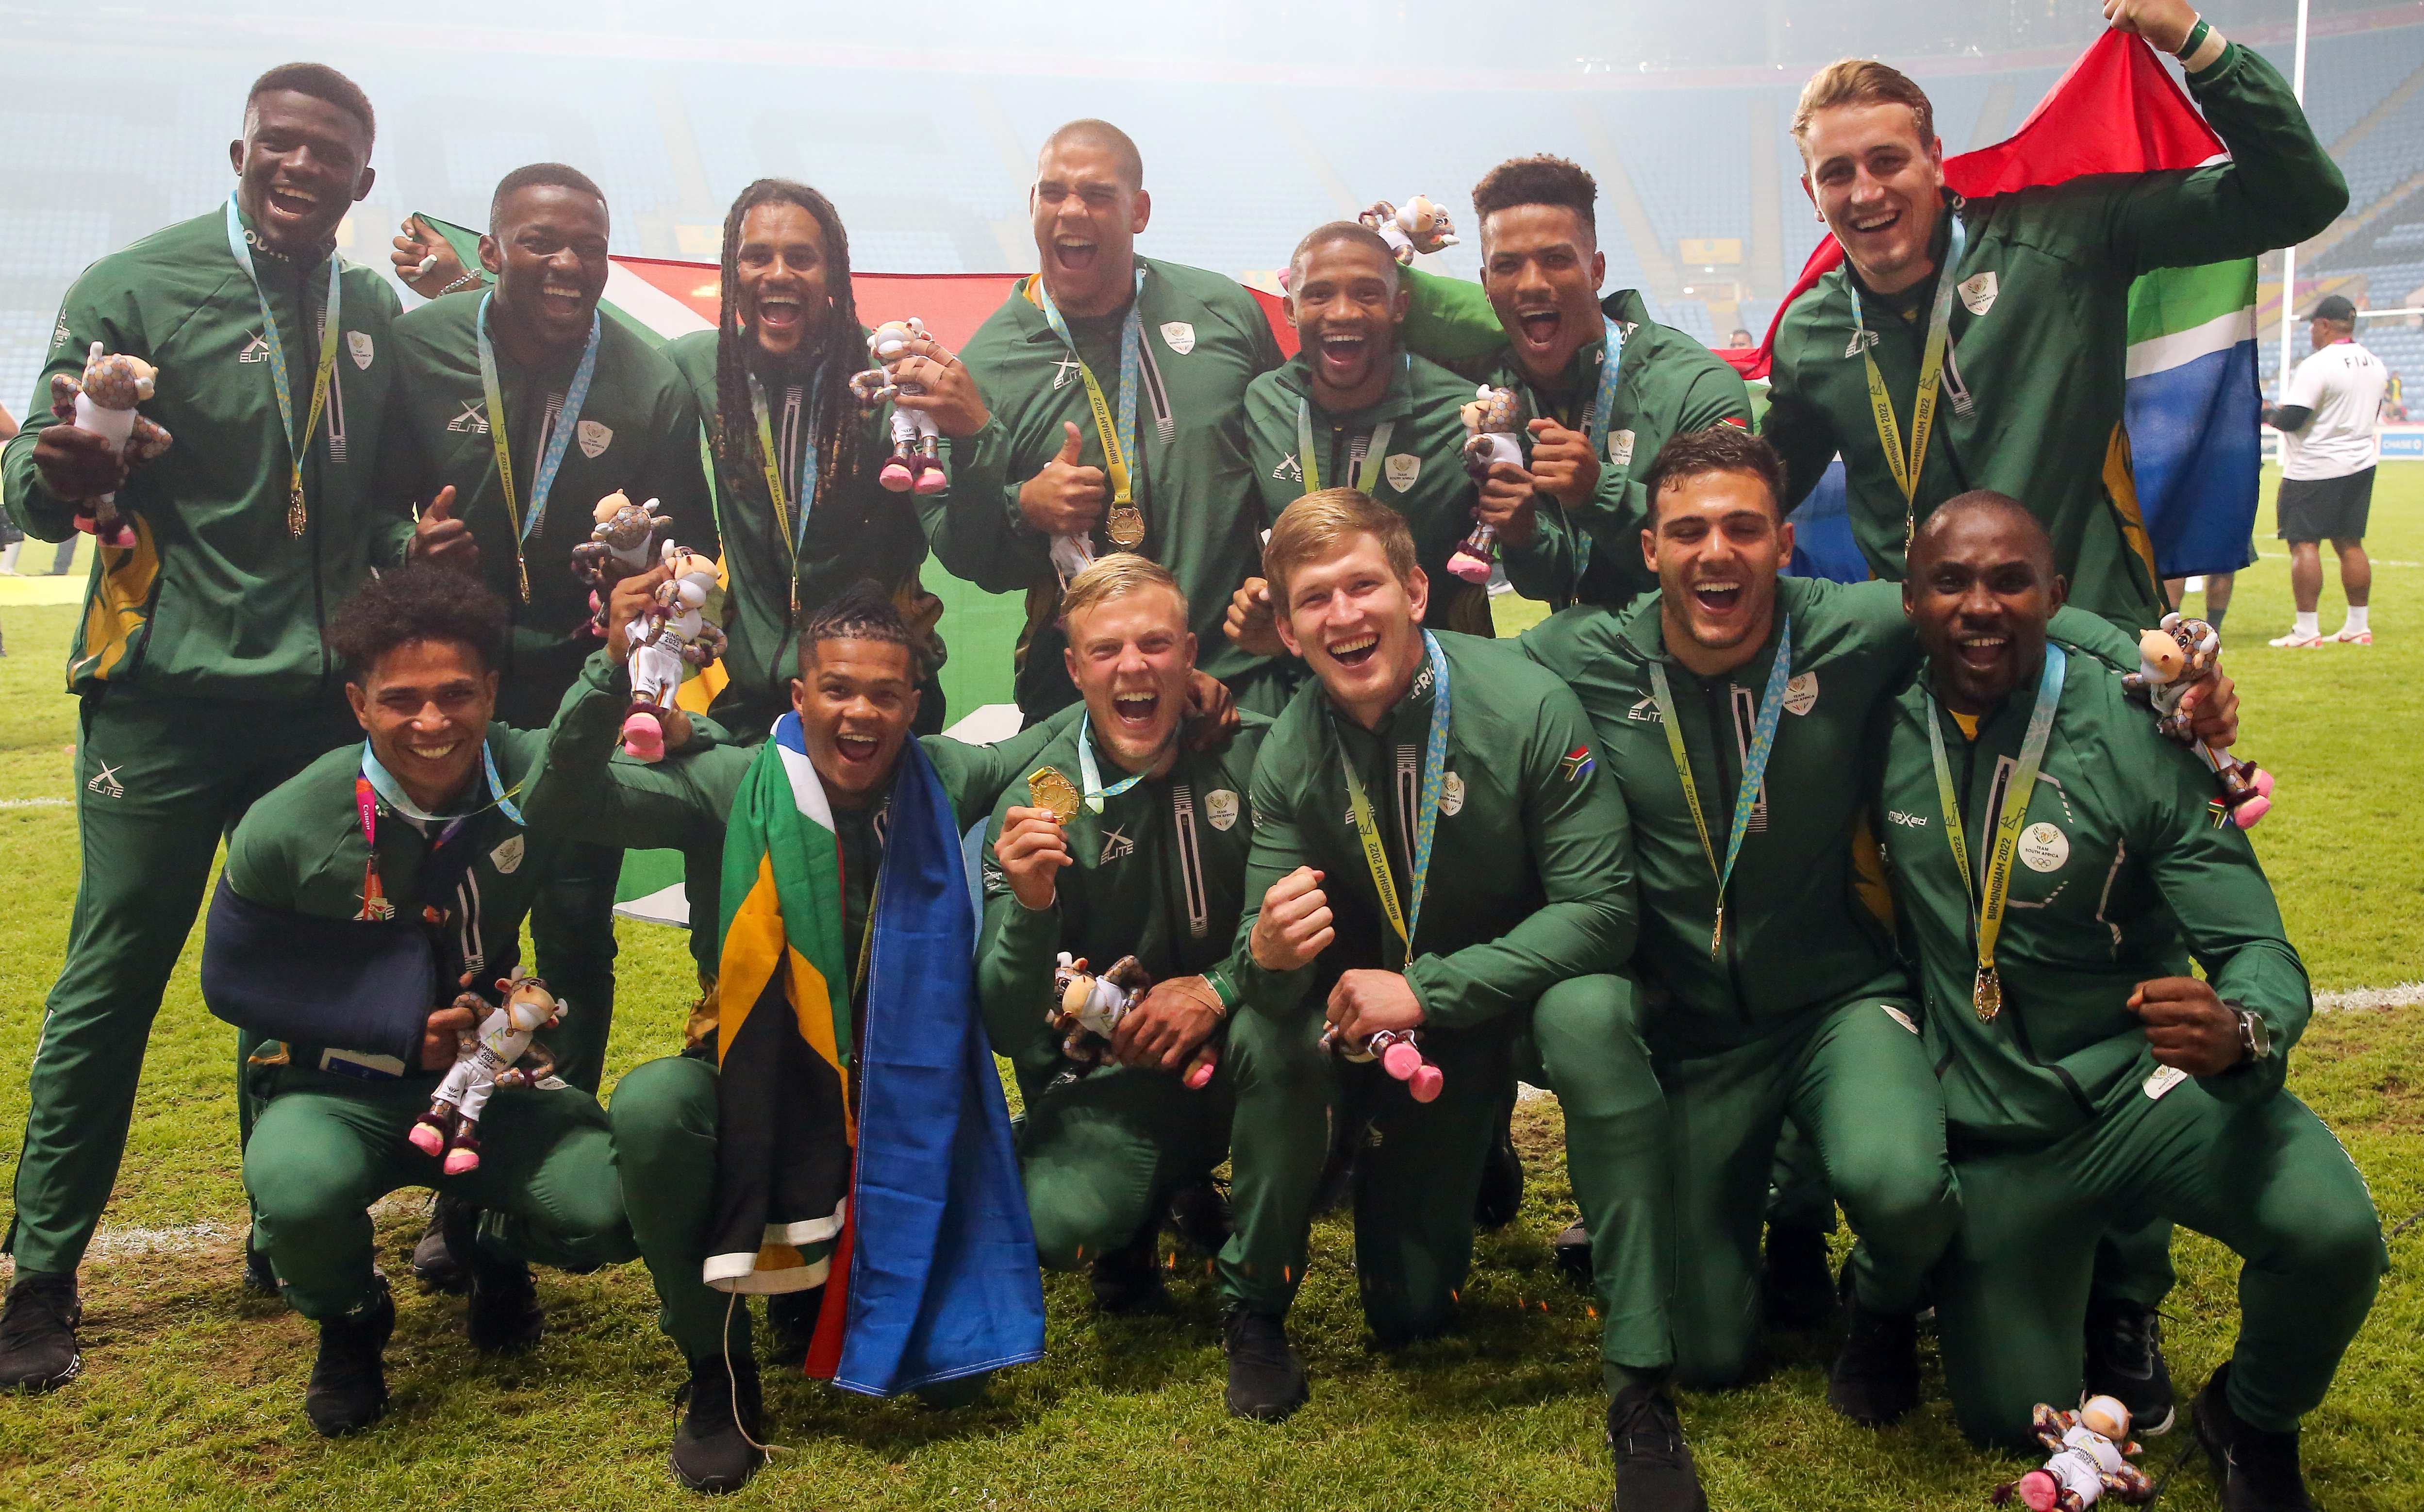 The Blitzboks celebrate winning the gold medal at the Commonwealth Games